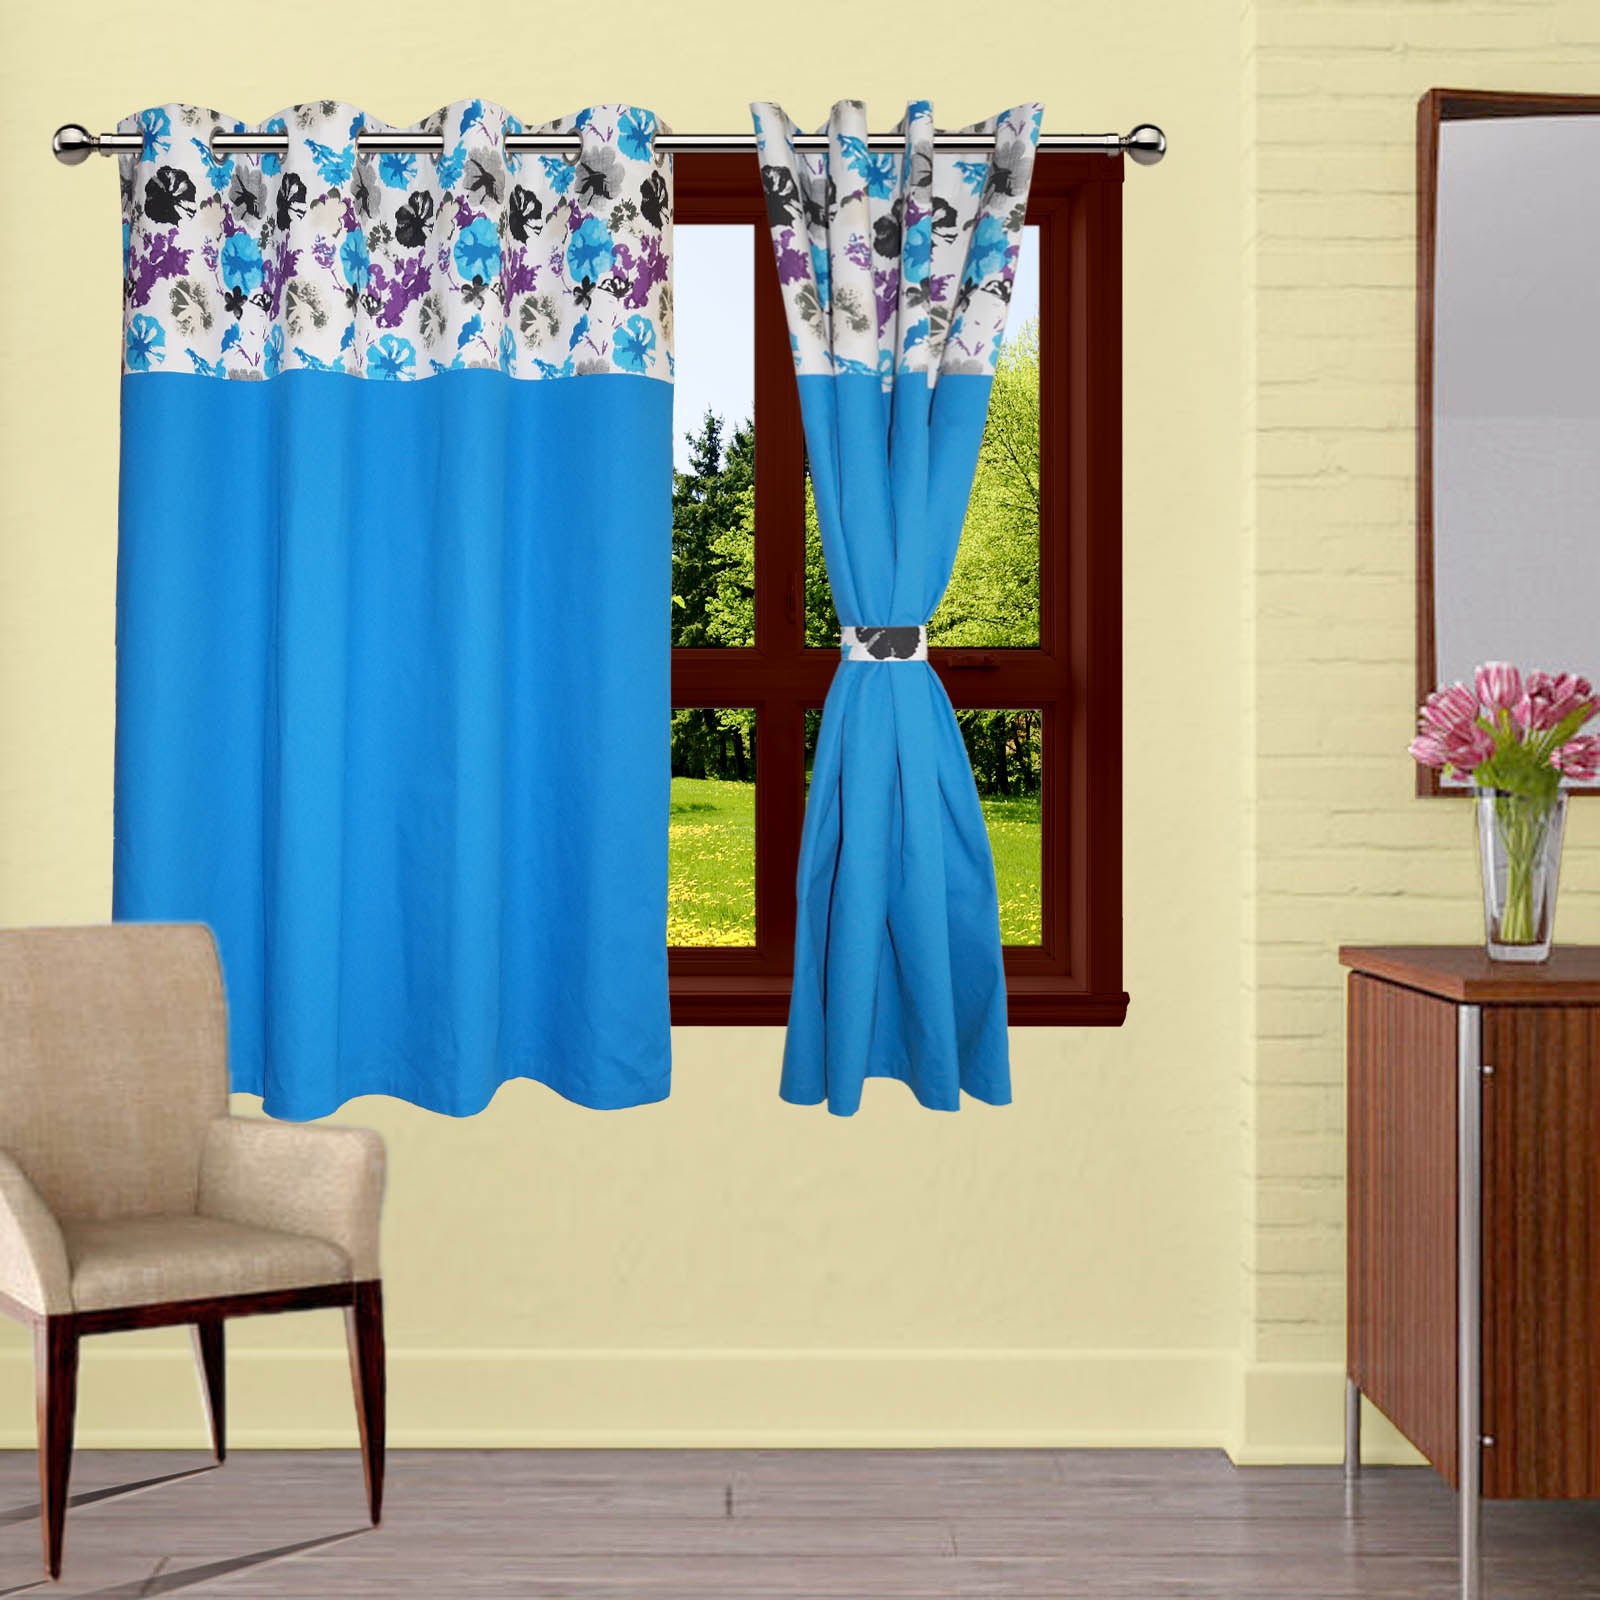 Lushomes Window Curtains, Blue Watercolor Printed Window Curtains for Living Room/Home with 8 Eyelets & Printed Tiebacks for Window, curtain 5 feet (54x60 Inches,Pack of: 1)